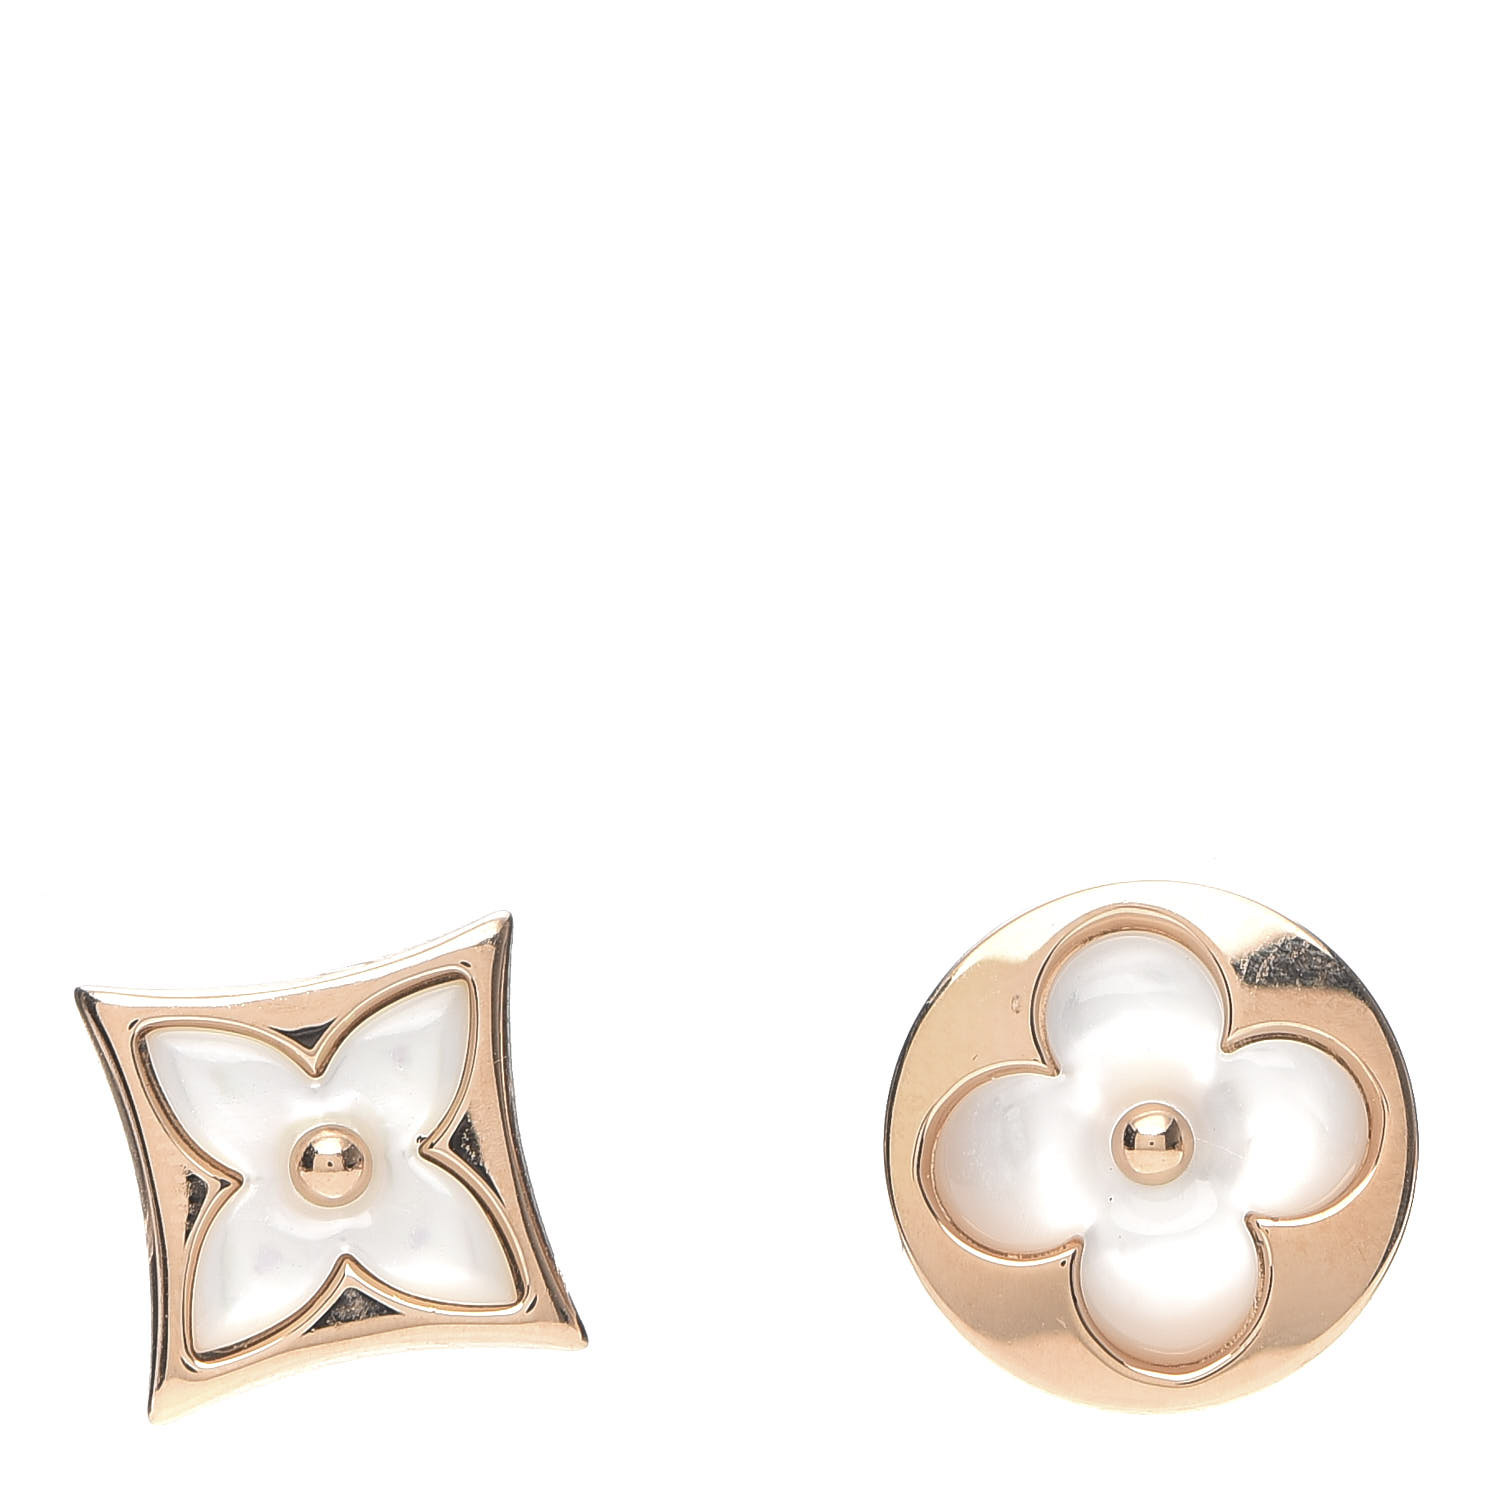 VUITTON 18K Pink Gold Mother of Pearl Color Blossom Star & Sun Stud Earrings 606942 | FASHIONPHILE